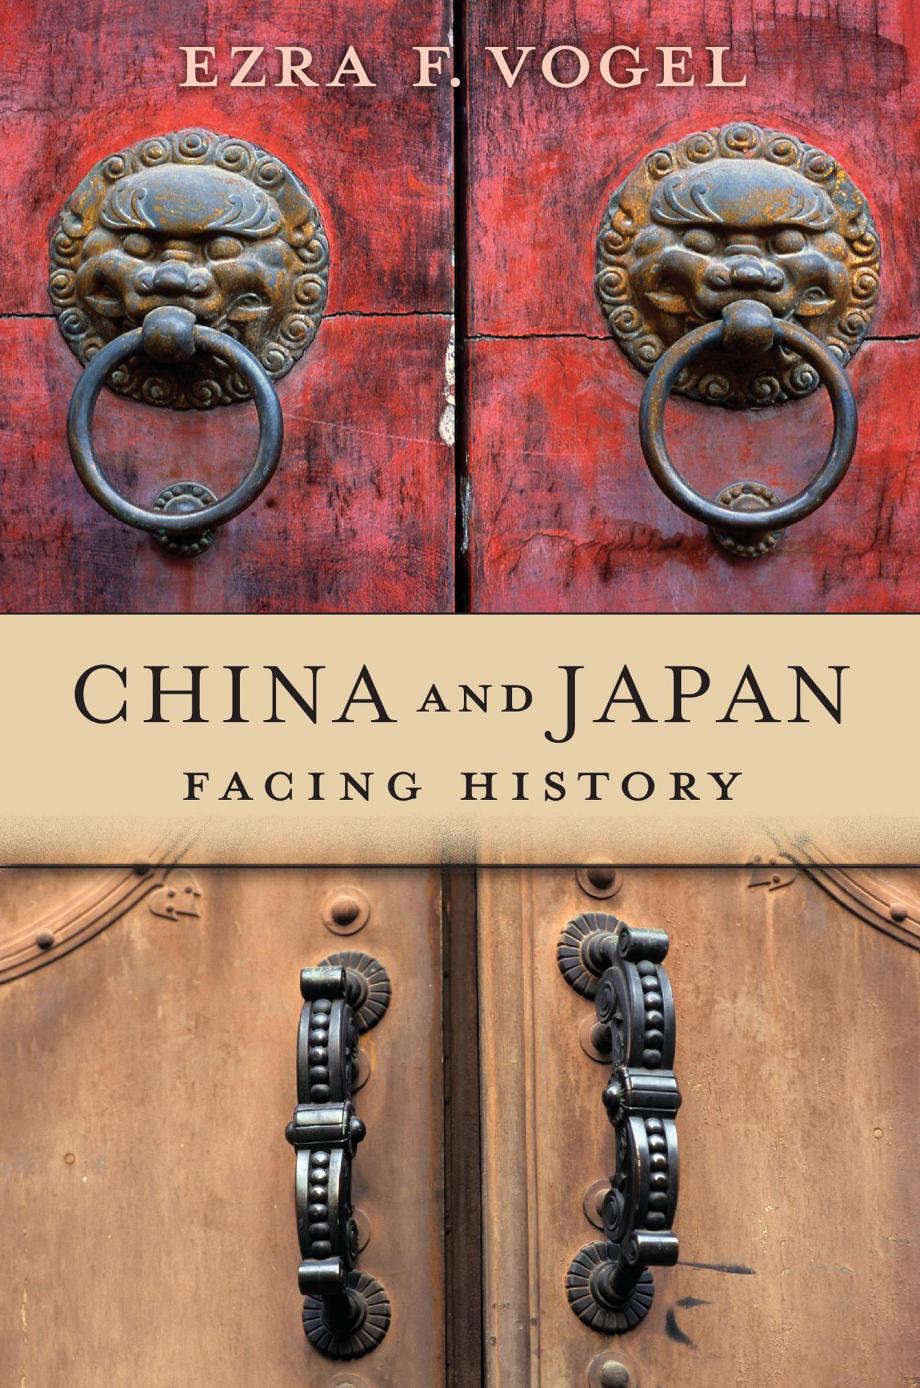 China and Japan by Ezra F. Vogel